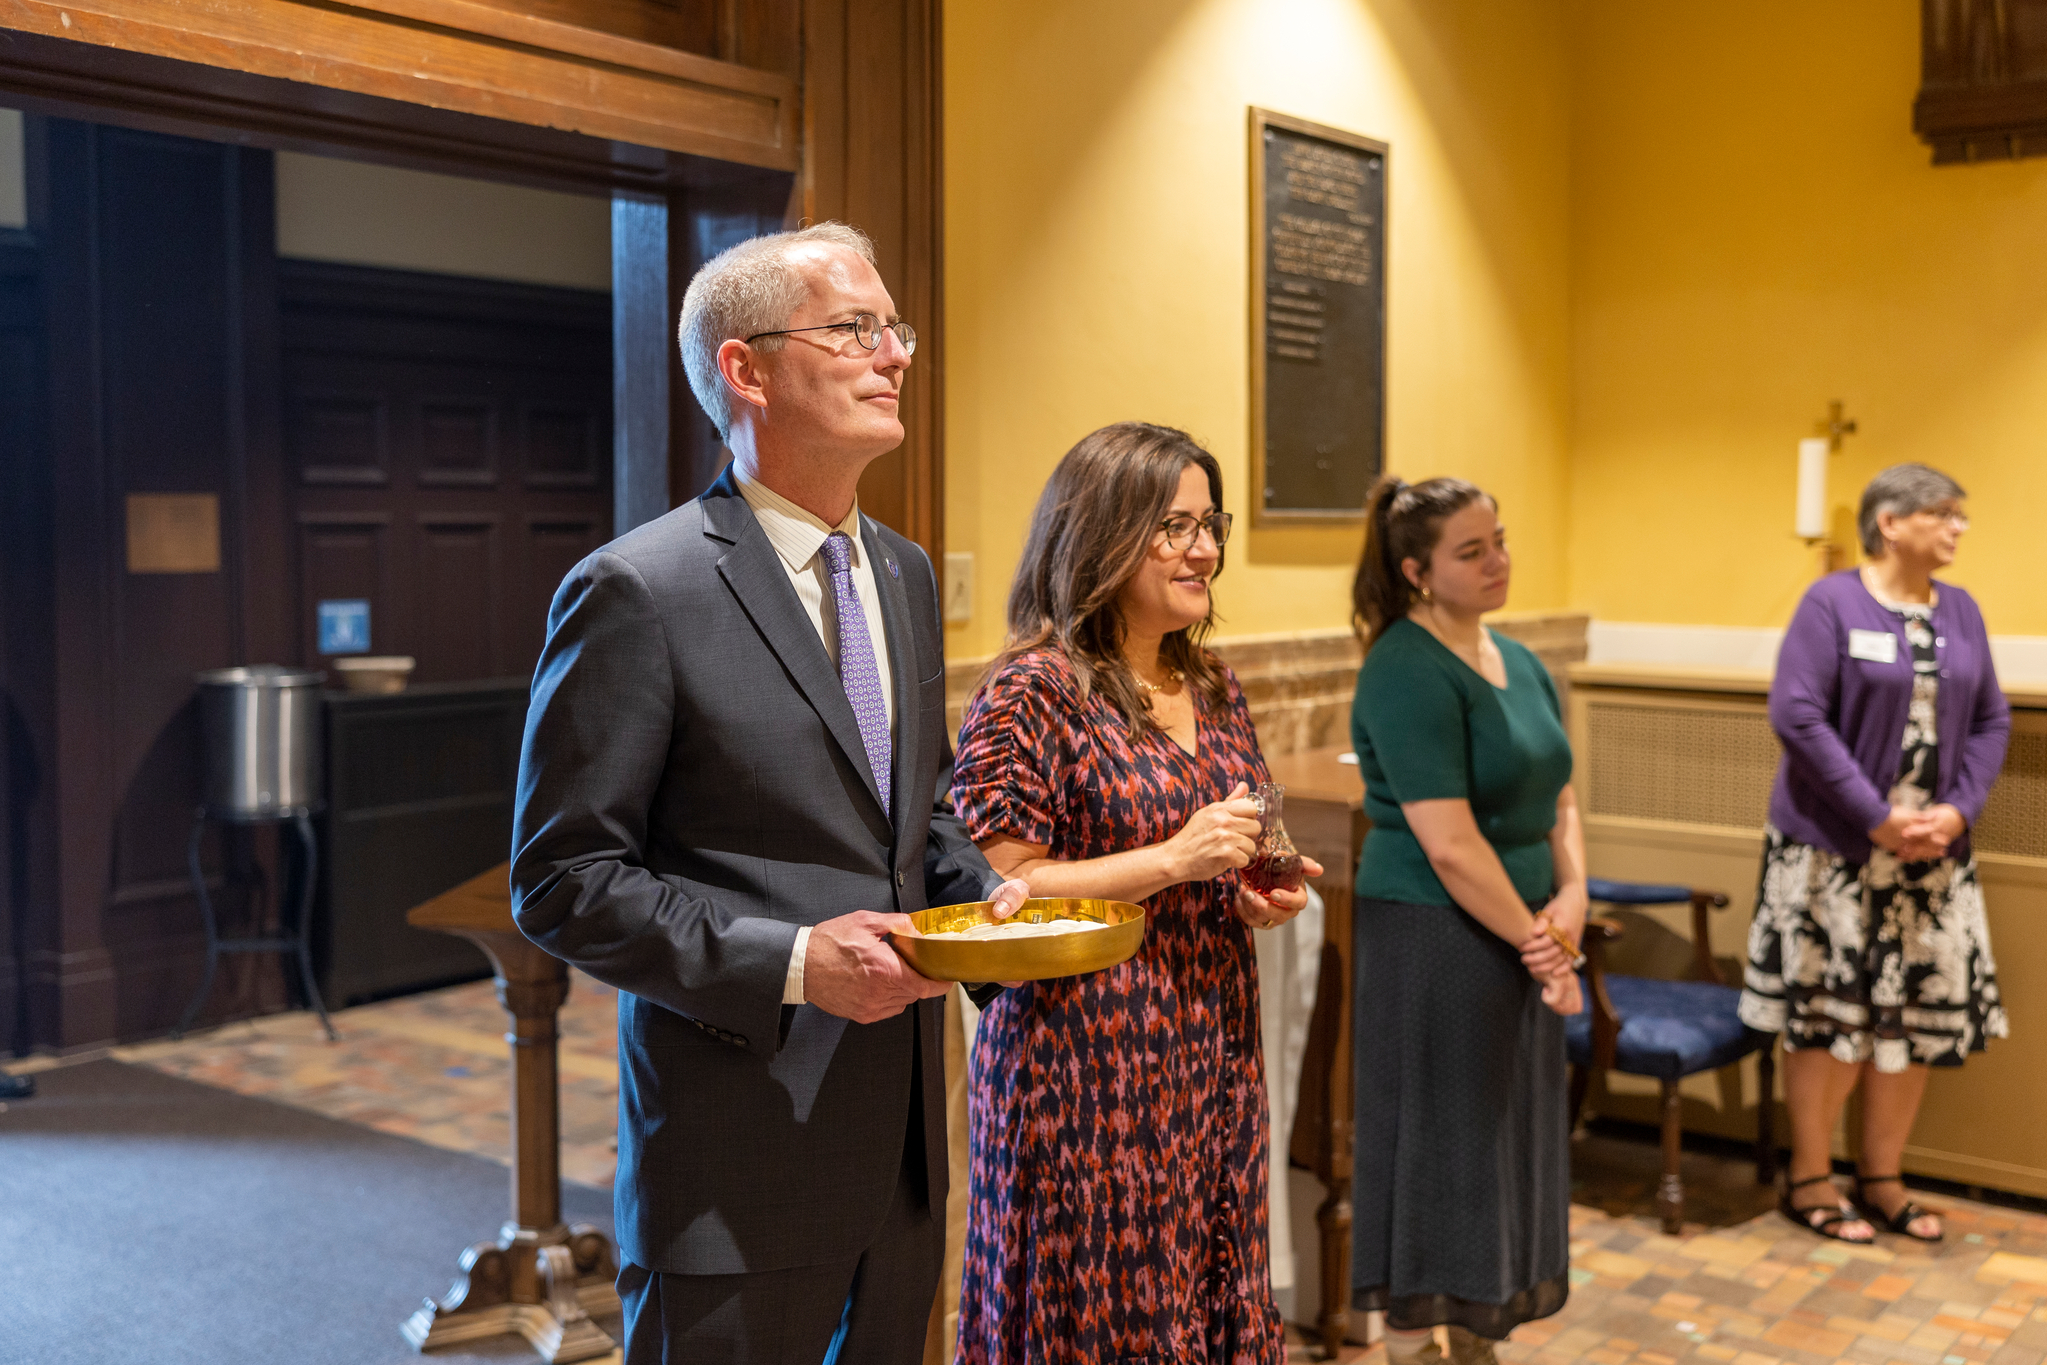 President Vischer and his wife performing the procession of the sacraments